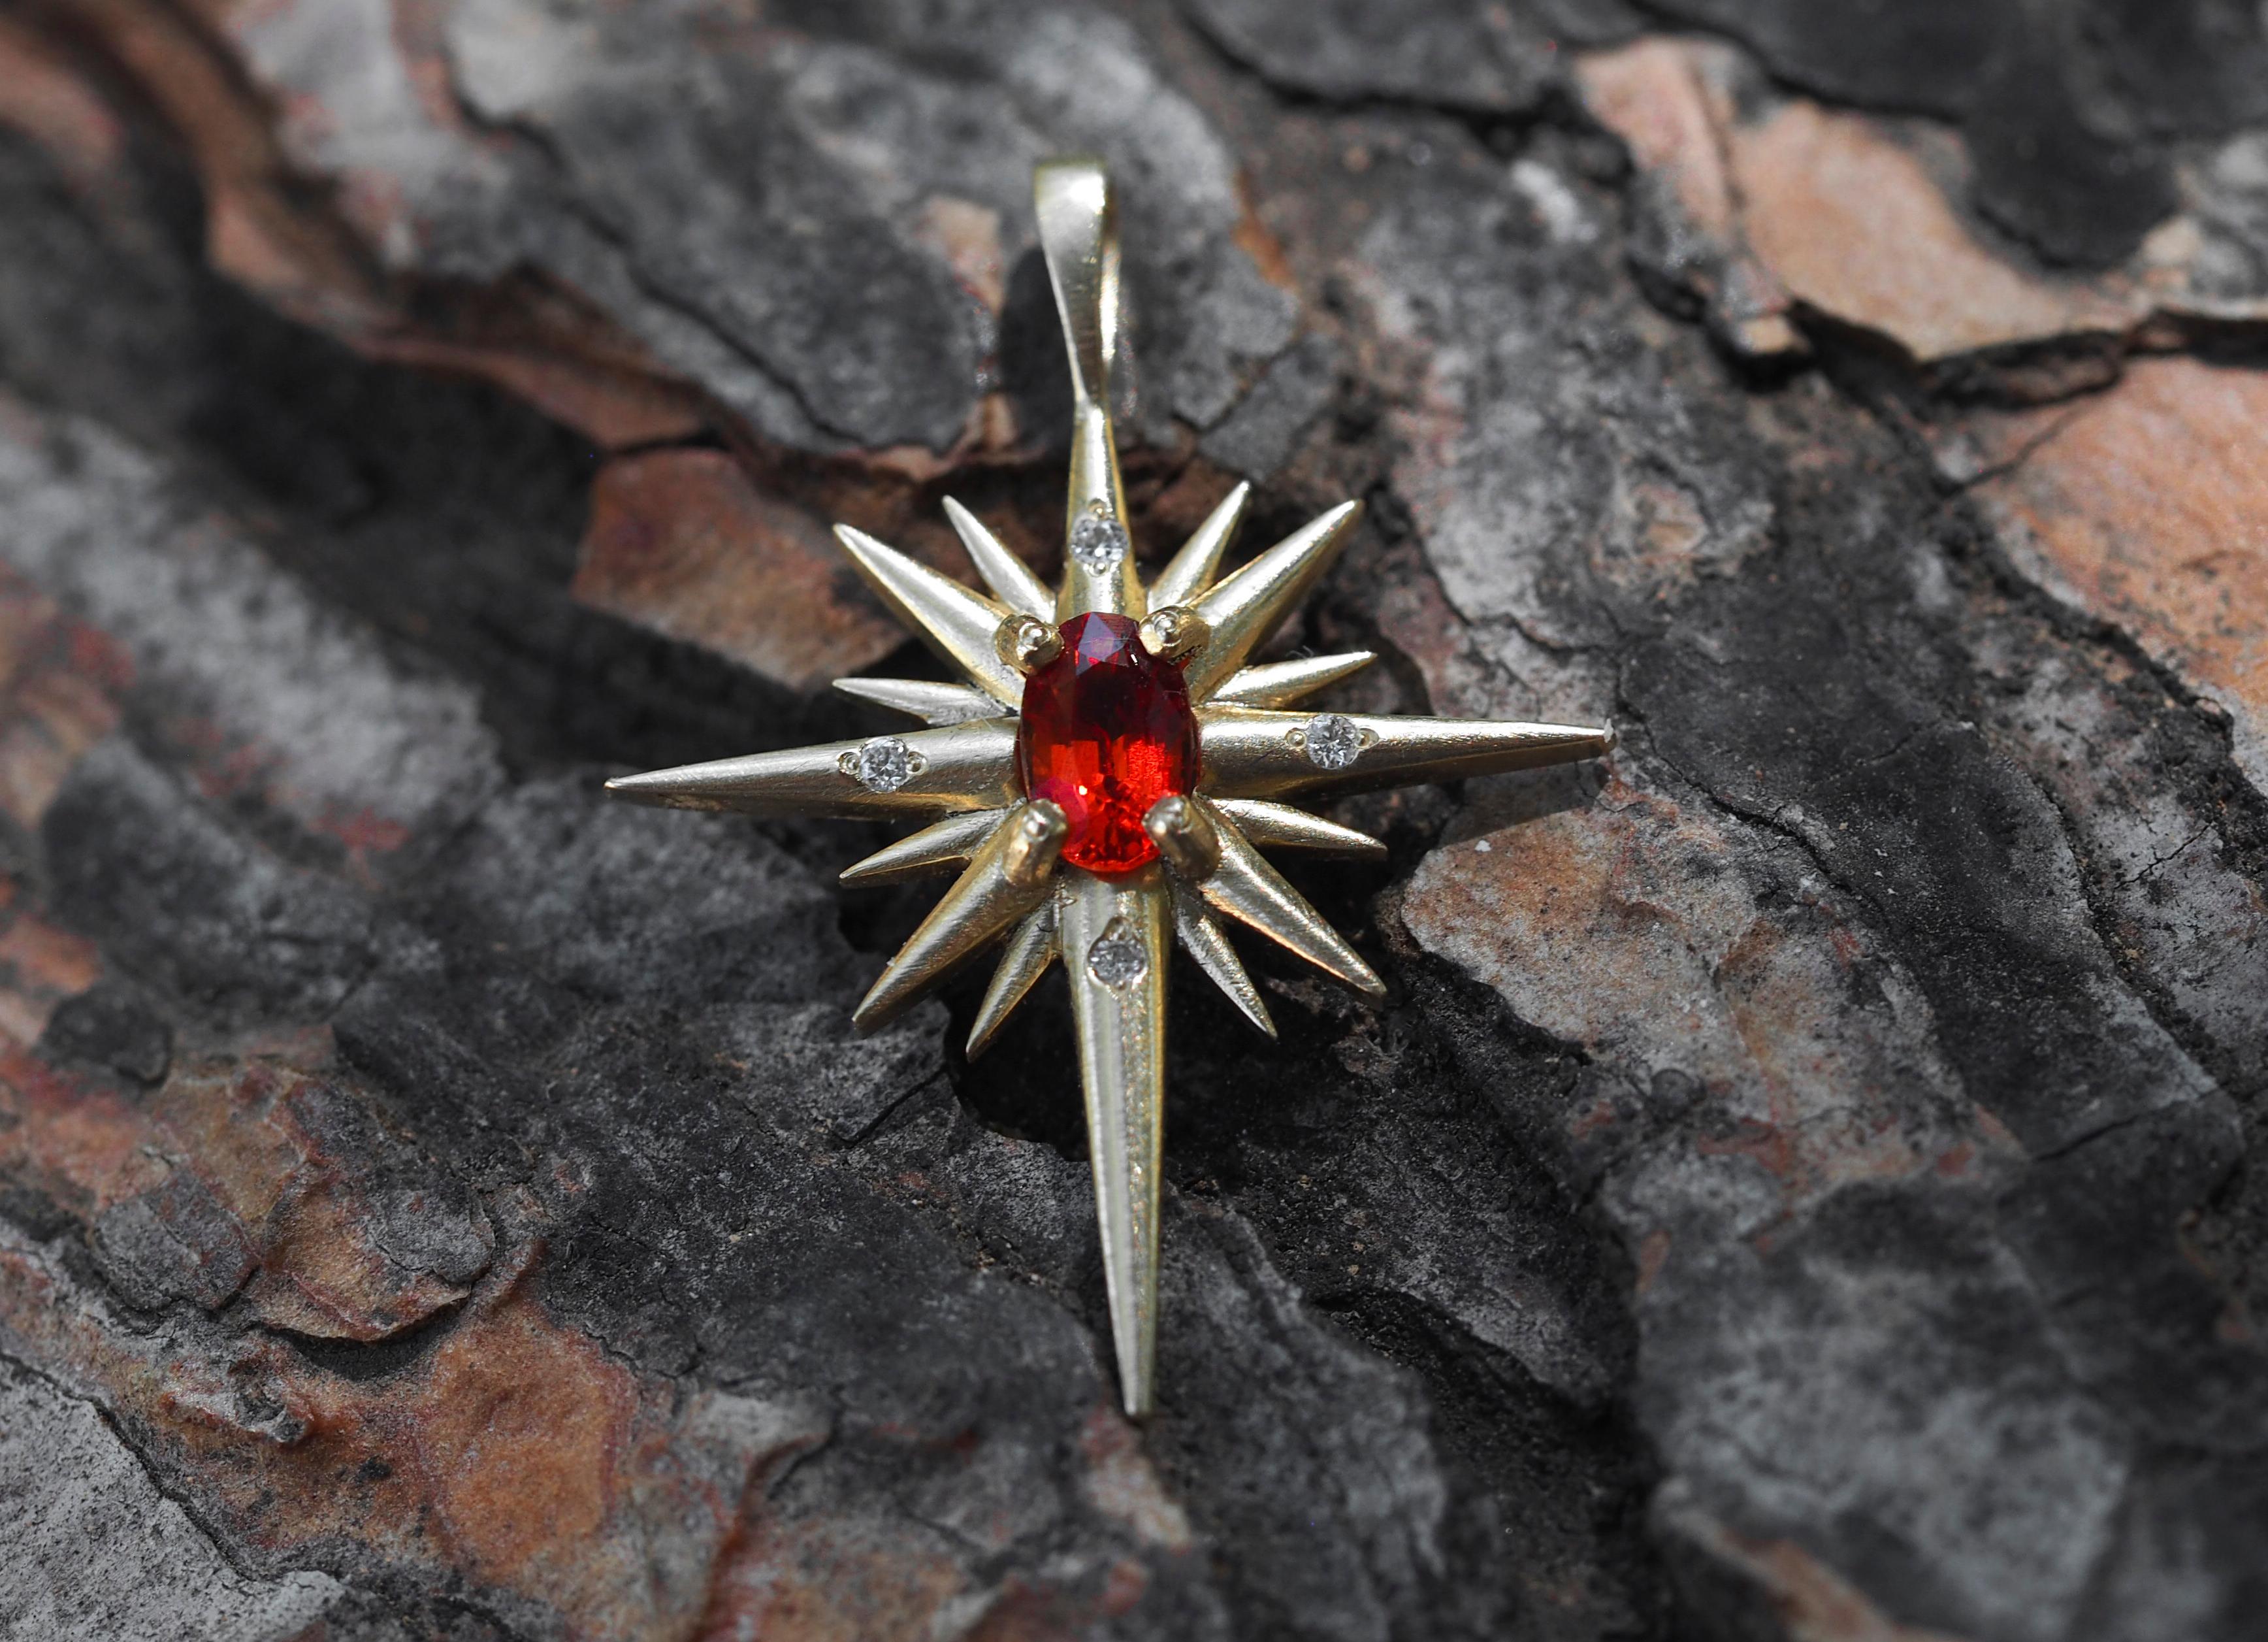 Celestial North Star pendant with sapphire. 
14k Gold pendant with orange sapphire. Red gemstone pendant. September birthstone pendant.

Metal: 14k gold
Weight 1.60 gr.
25.5x18.5 mm size

Gemstones:
Sapphires: oval shape, orange red color,